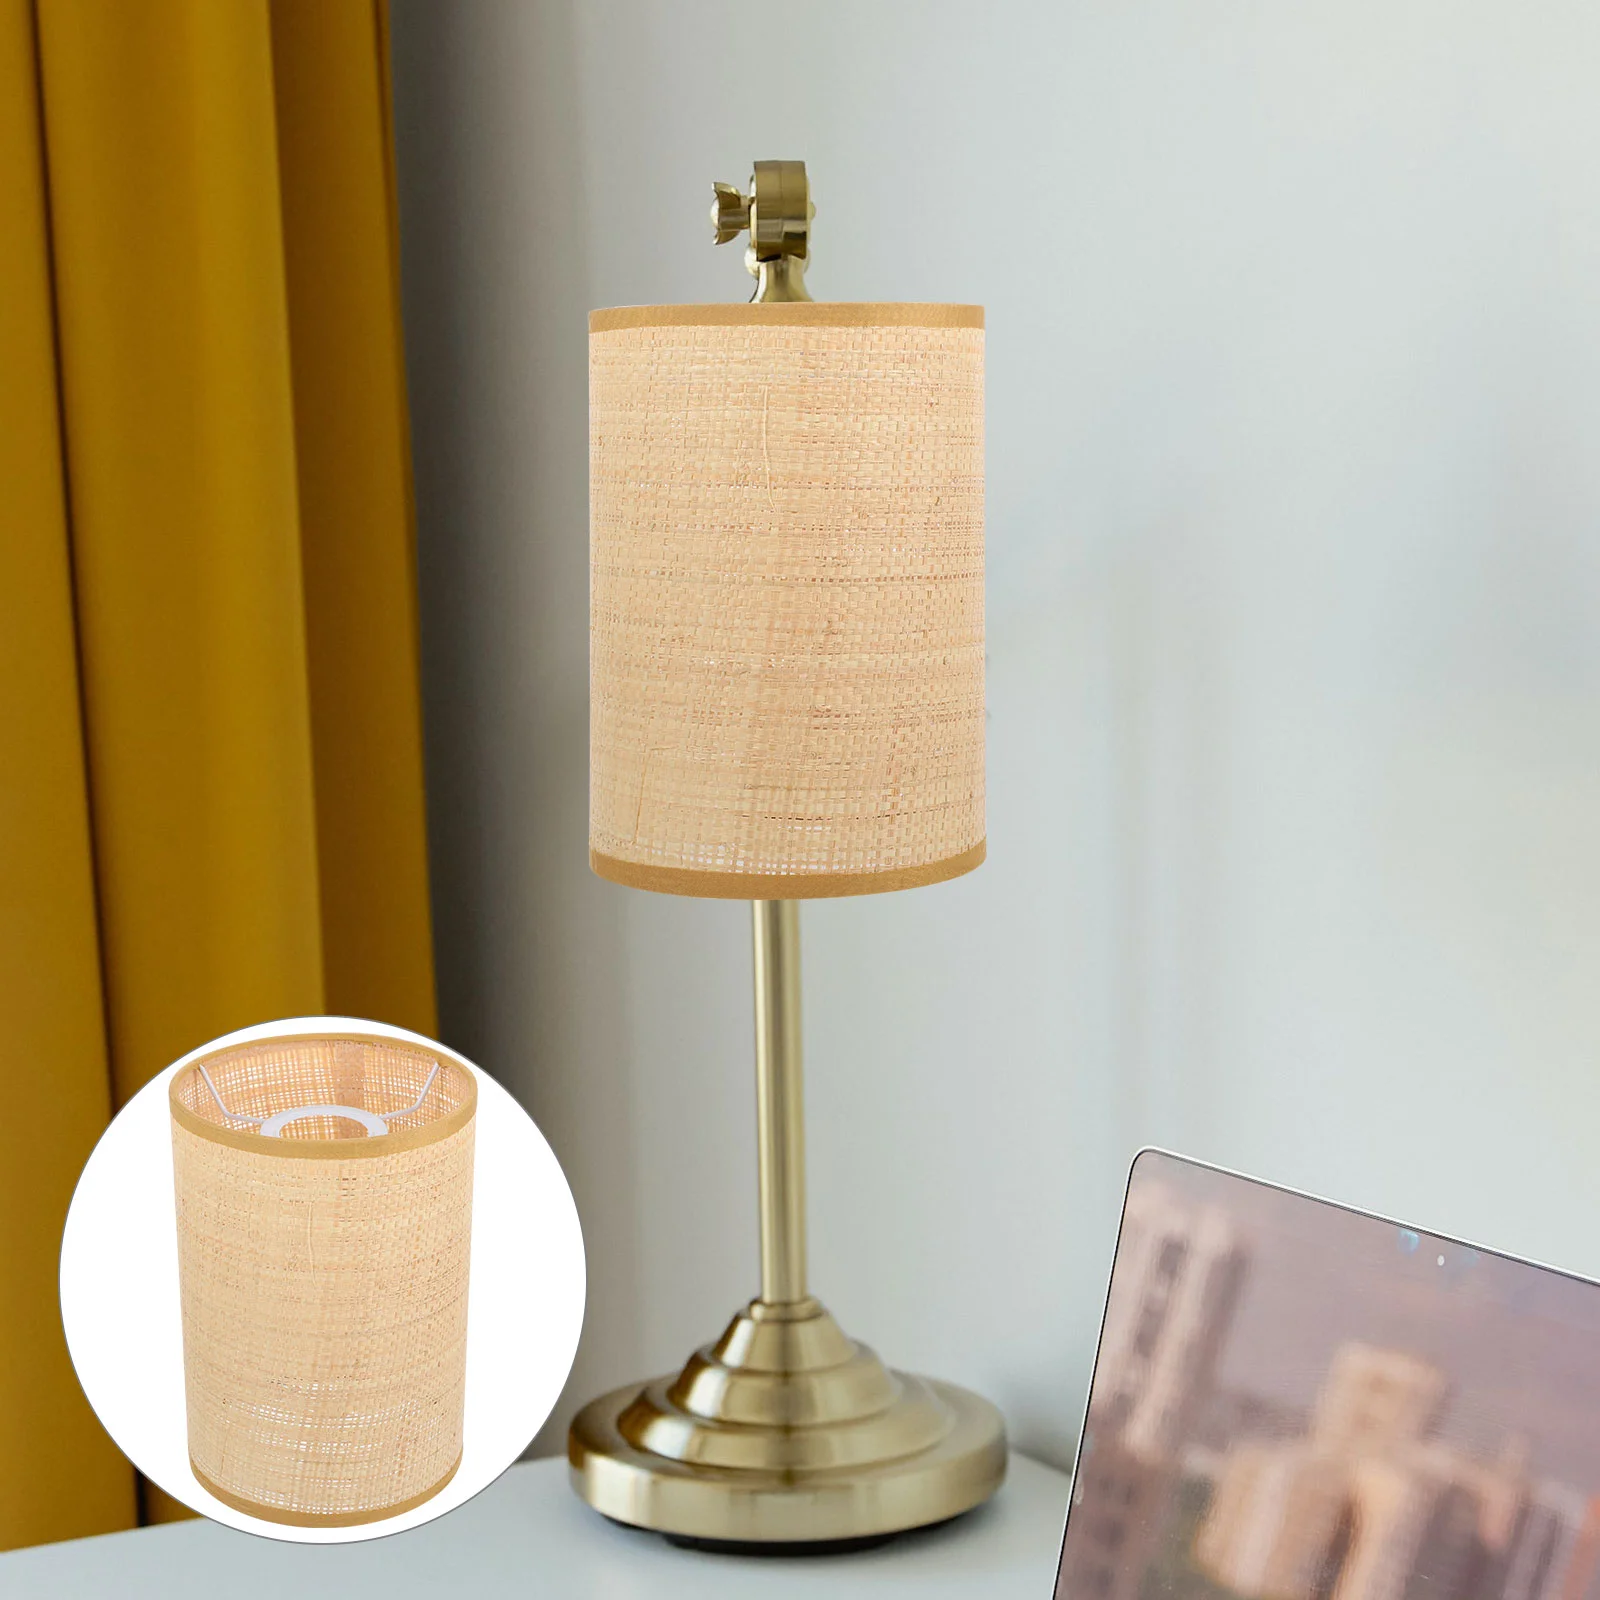 

Desk Lamp Shade E27/E14 Rattan Lampshade Rustic Country Lamp Shade Light Cover Screen For floor